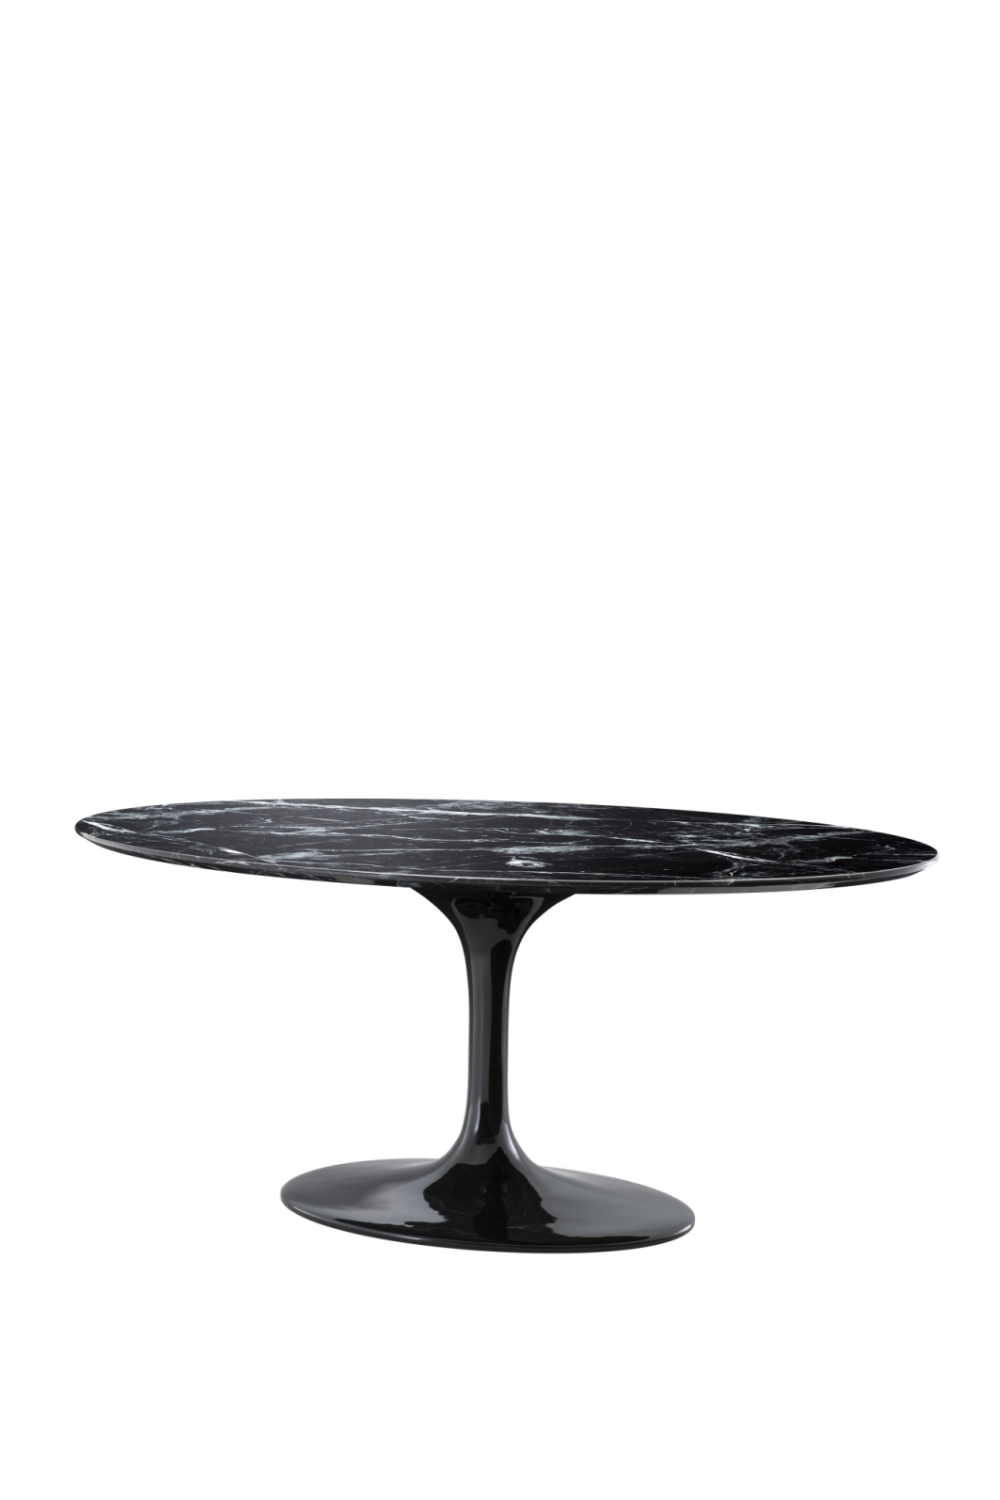 Oval Marble Dining Table | Eichholtz Solo | OROA.com